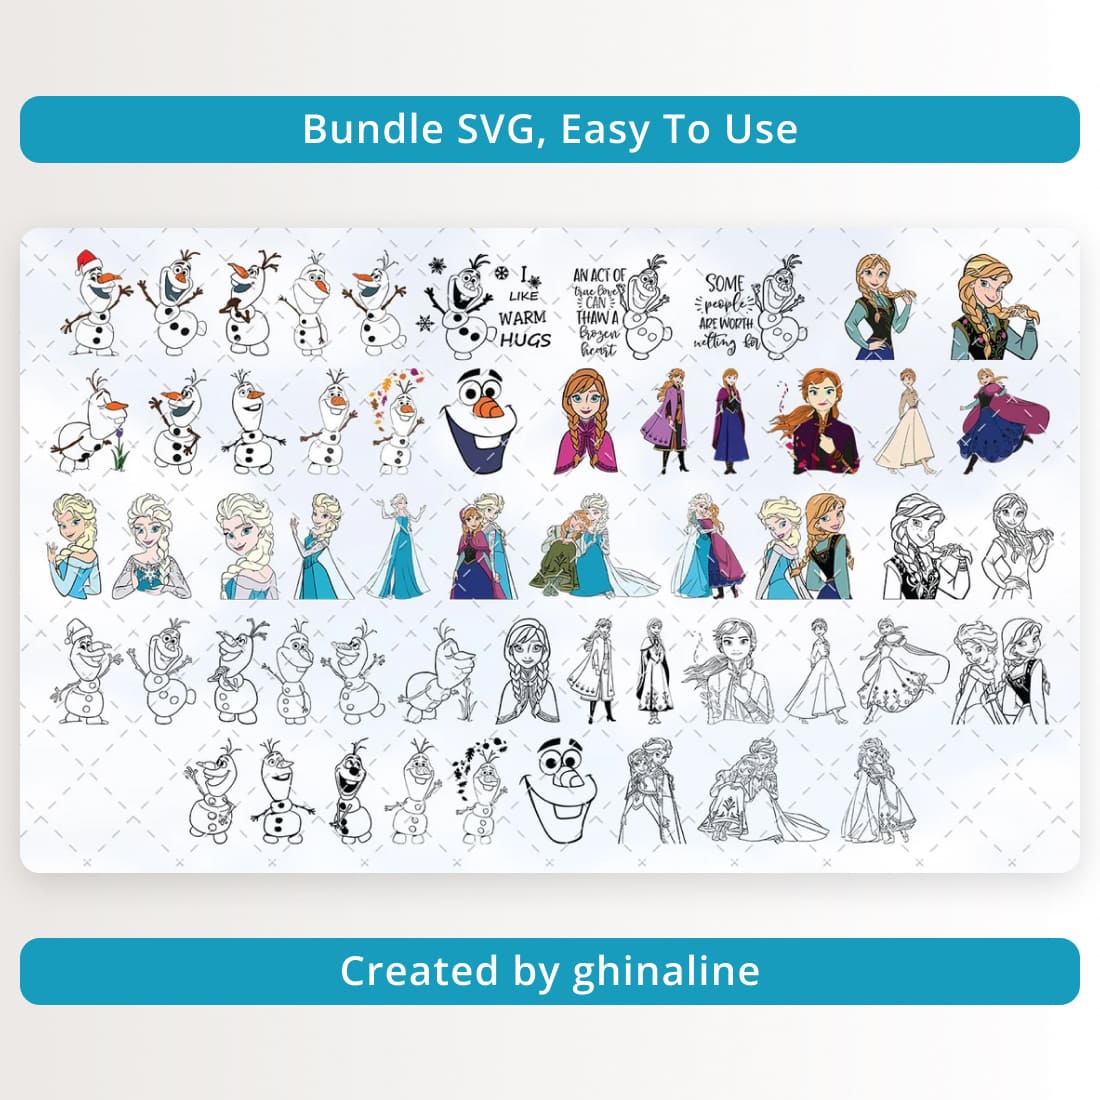 Bundle SVG Easy To Use.